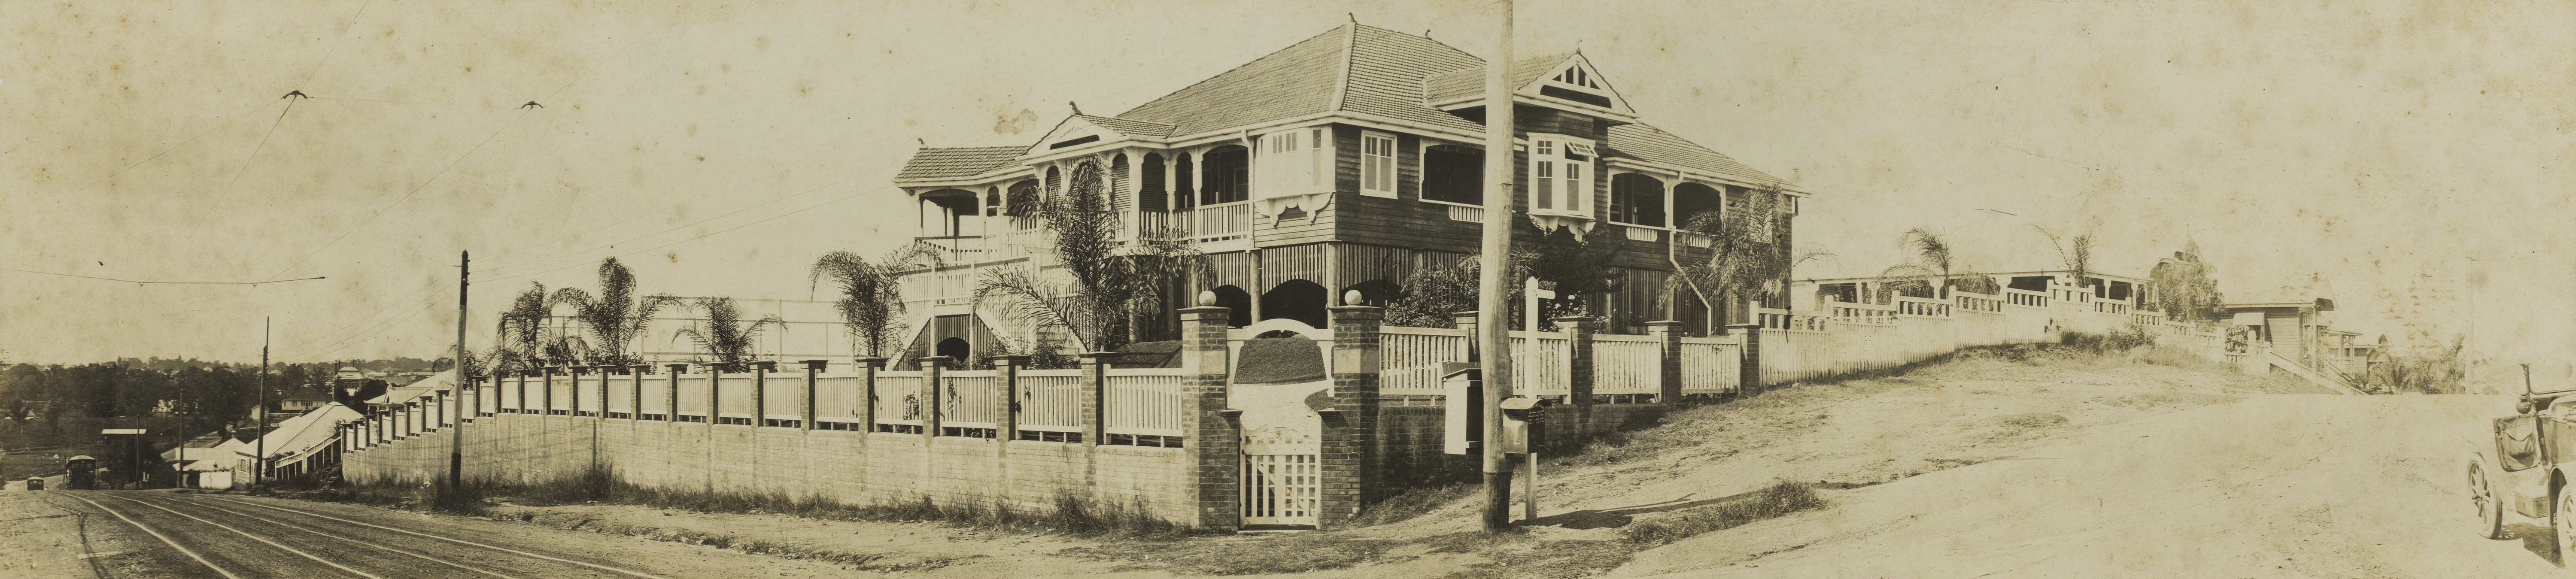 Panorama of a large Queenslander house on the corner of Milton Road and Hobbs Street, Auchenflower